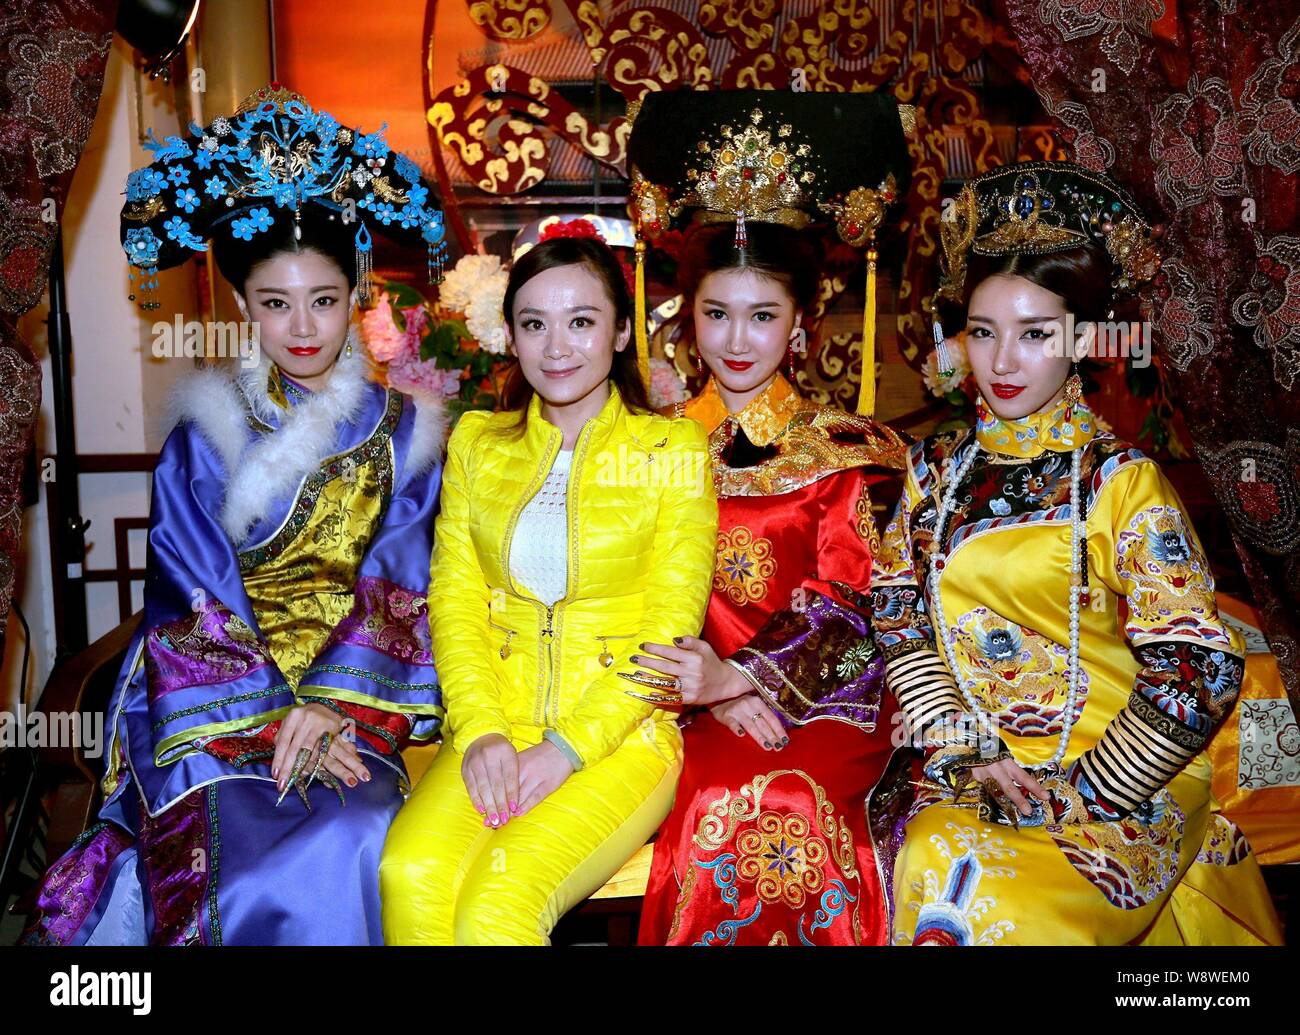 Members Of South Korean Girl Group Swing Girls Dressed In Traditional Chinese Royal Costume Pose